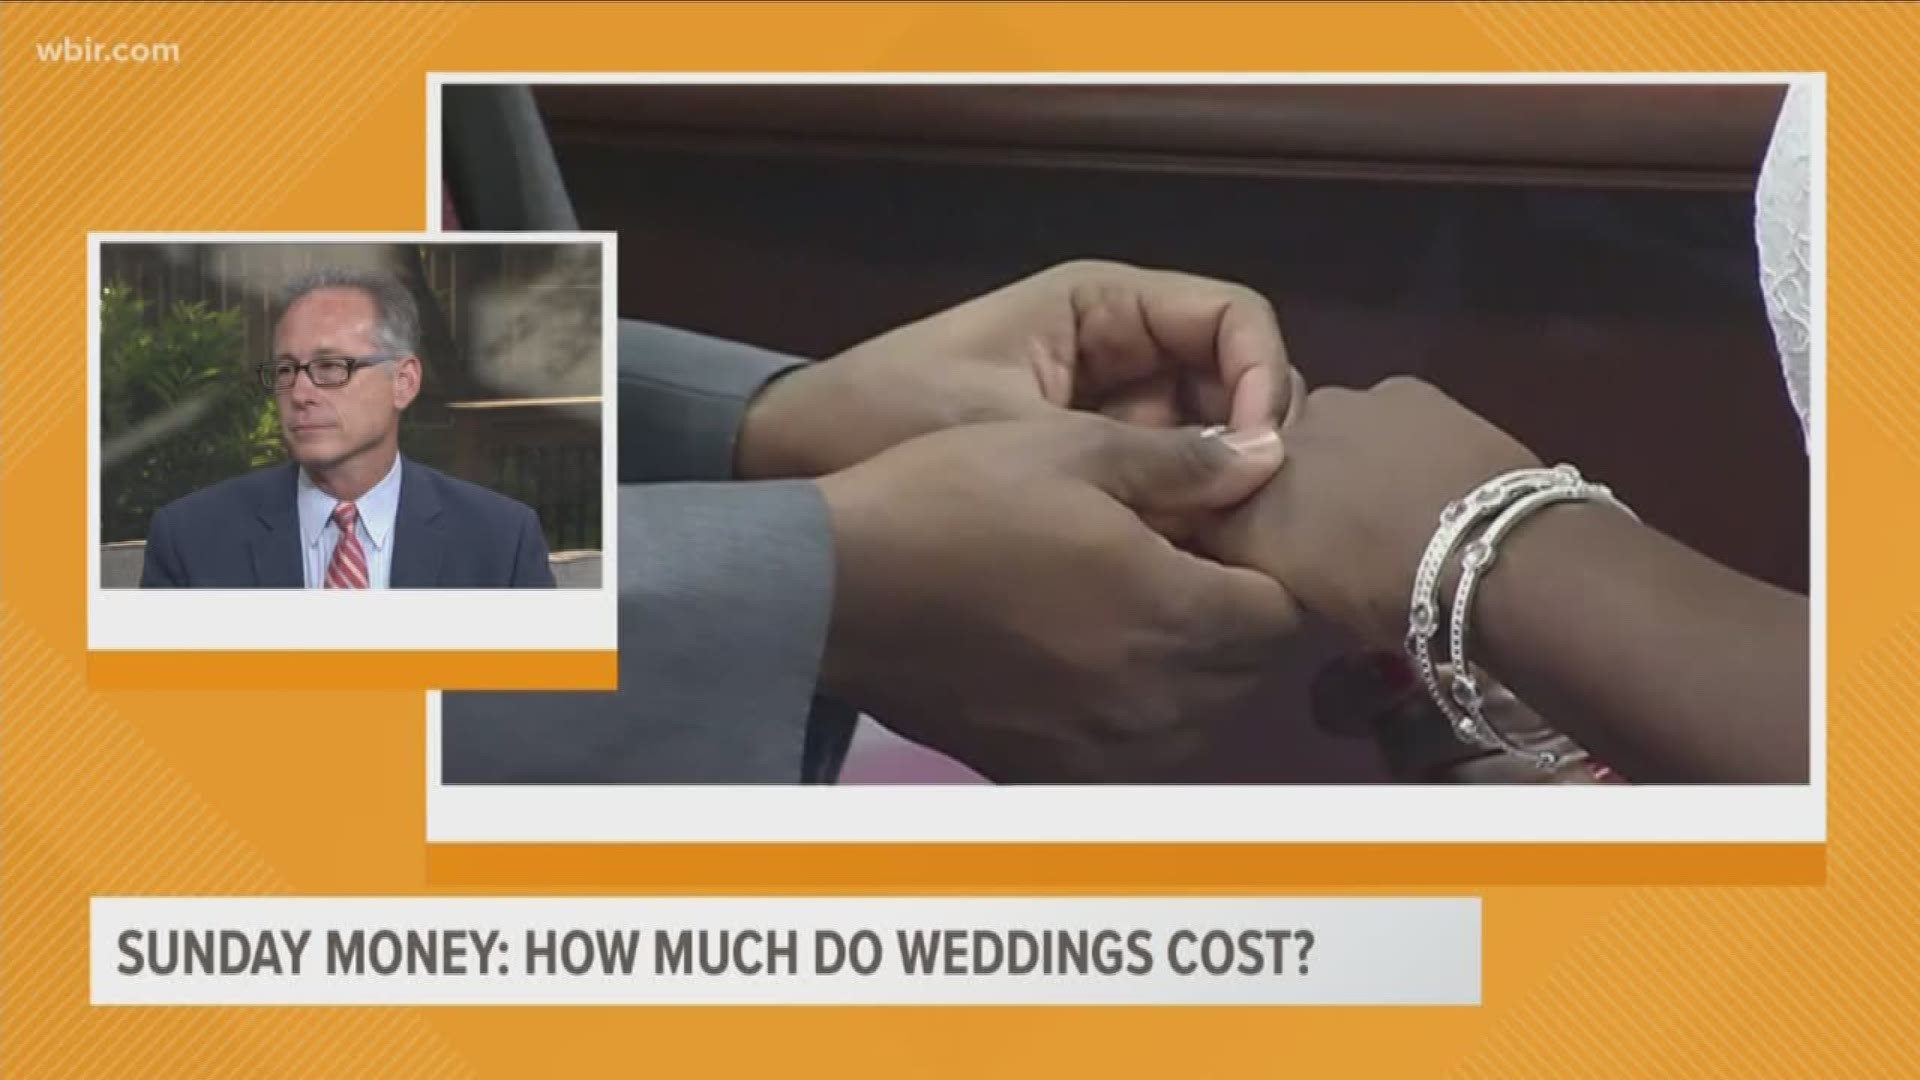 Paul Fain answers all the questions you may have when it comes to money and weddings.